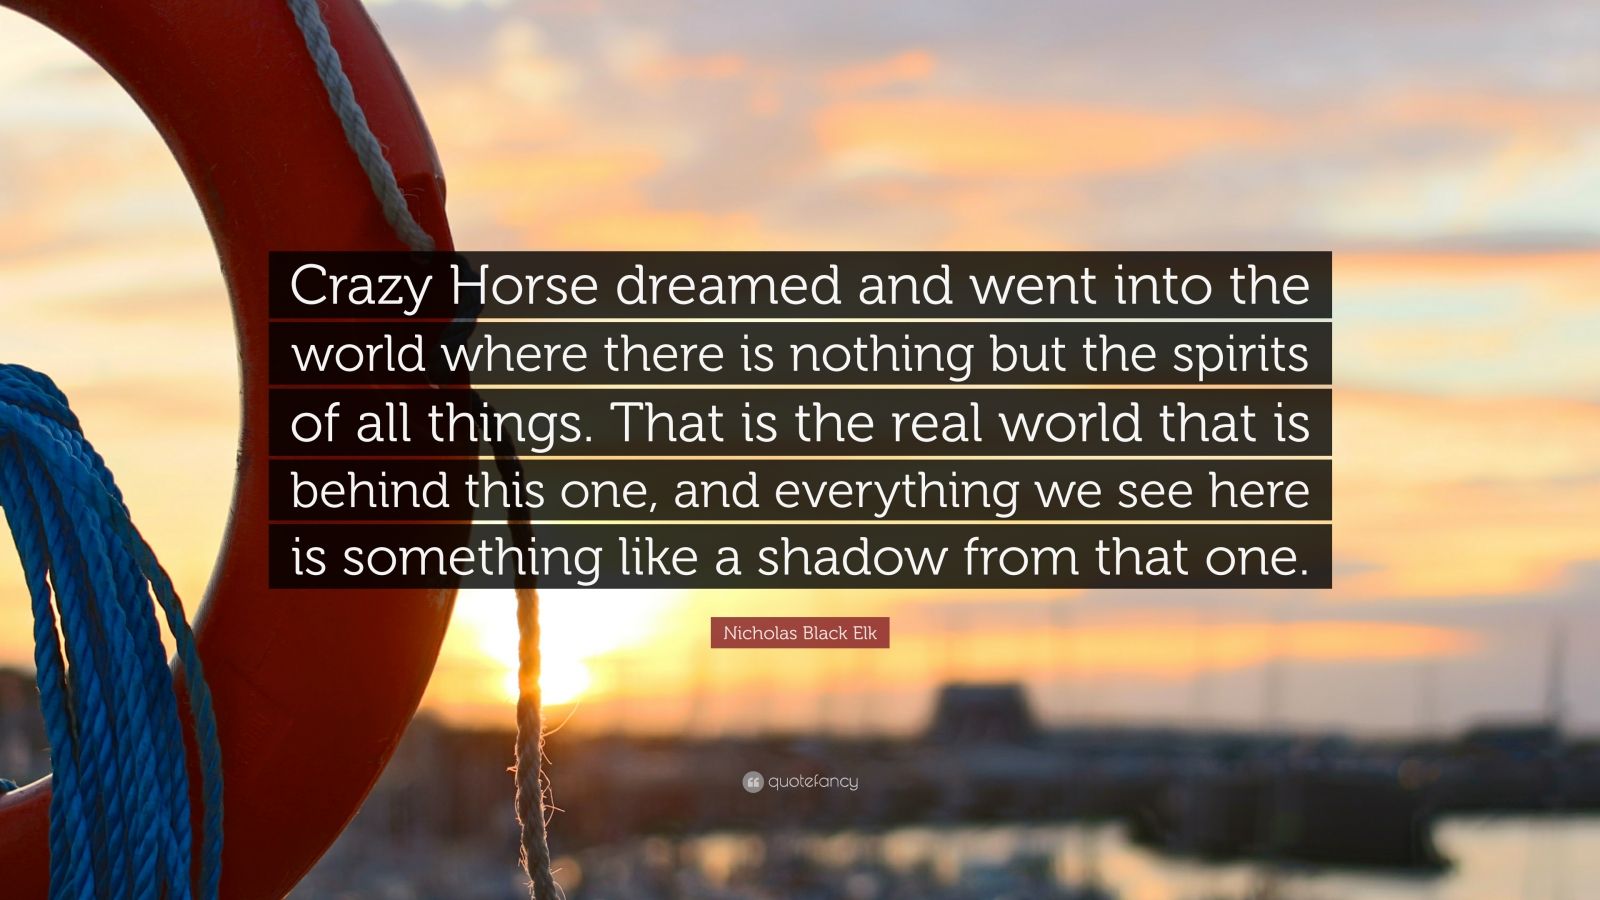 Nicholas Black Elk Quote: "Crazy Horse dreamed and went into the world where there is nothing ...